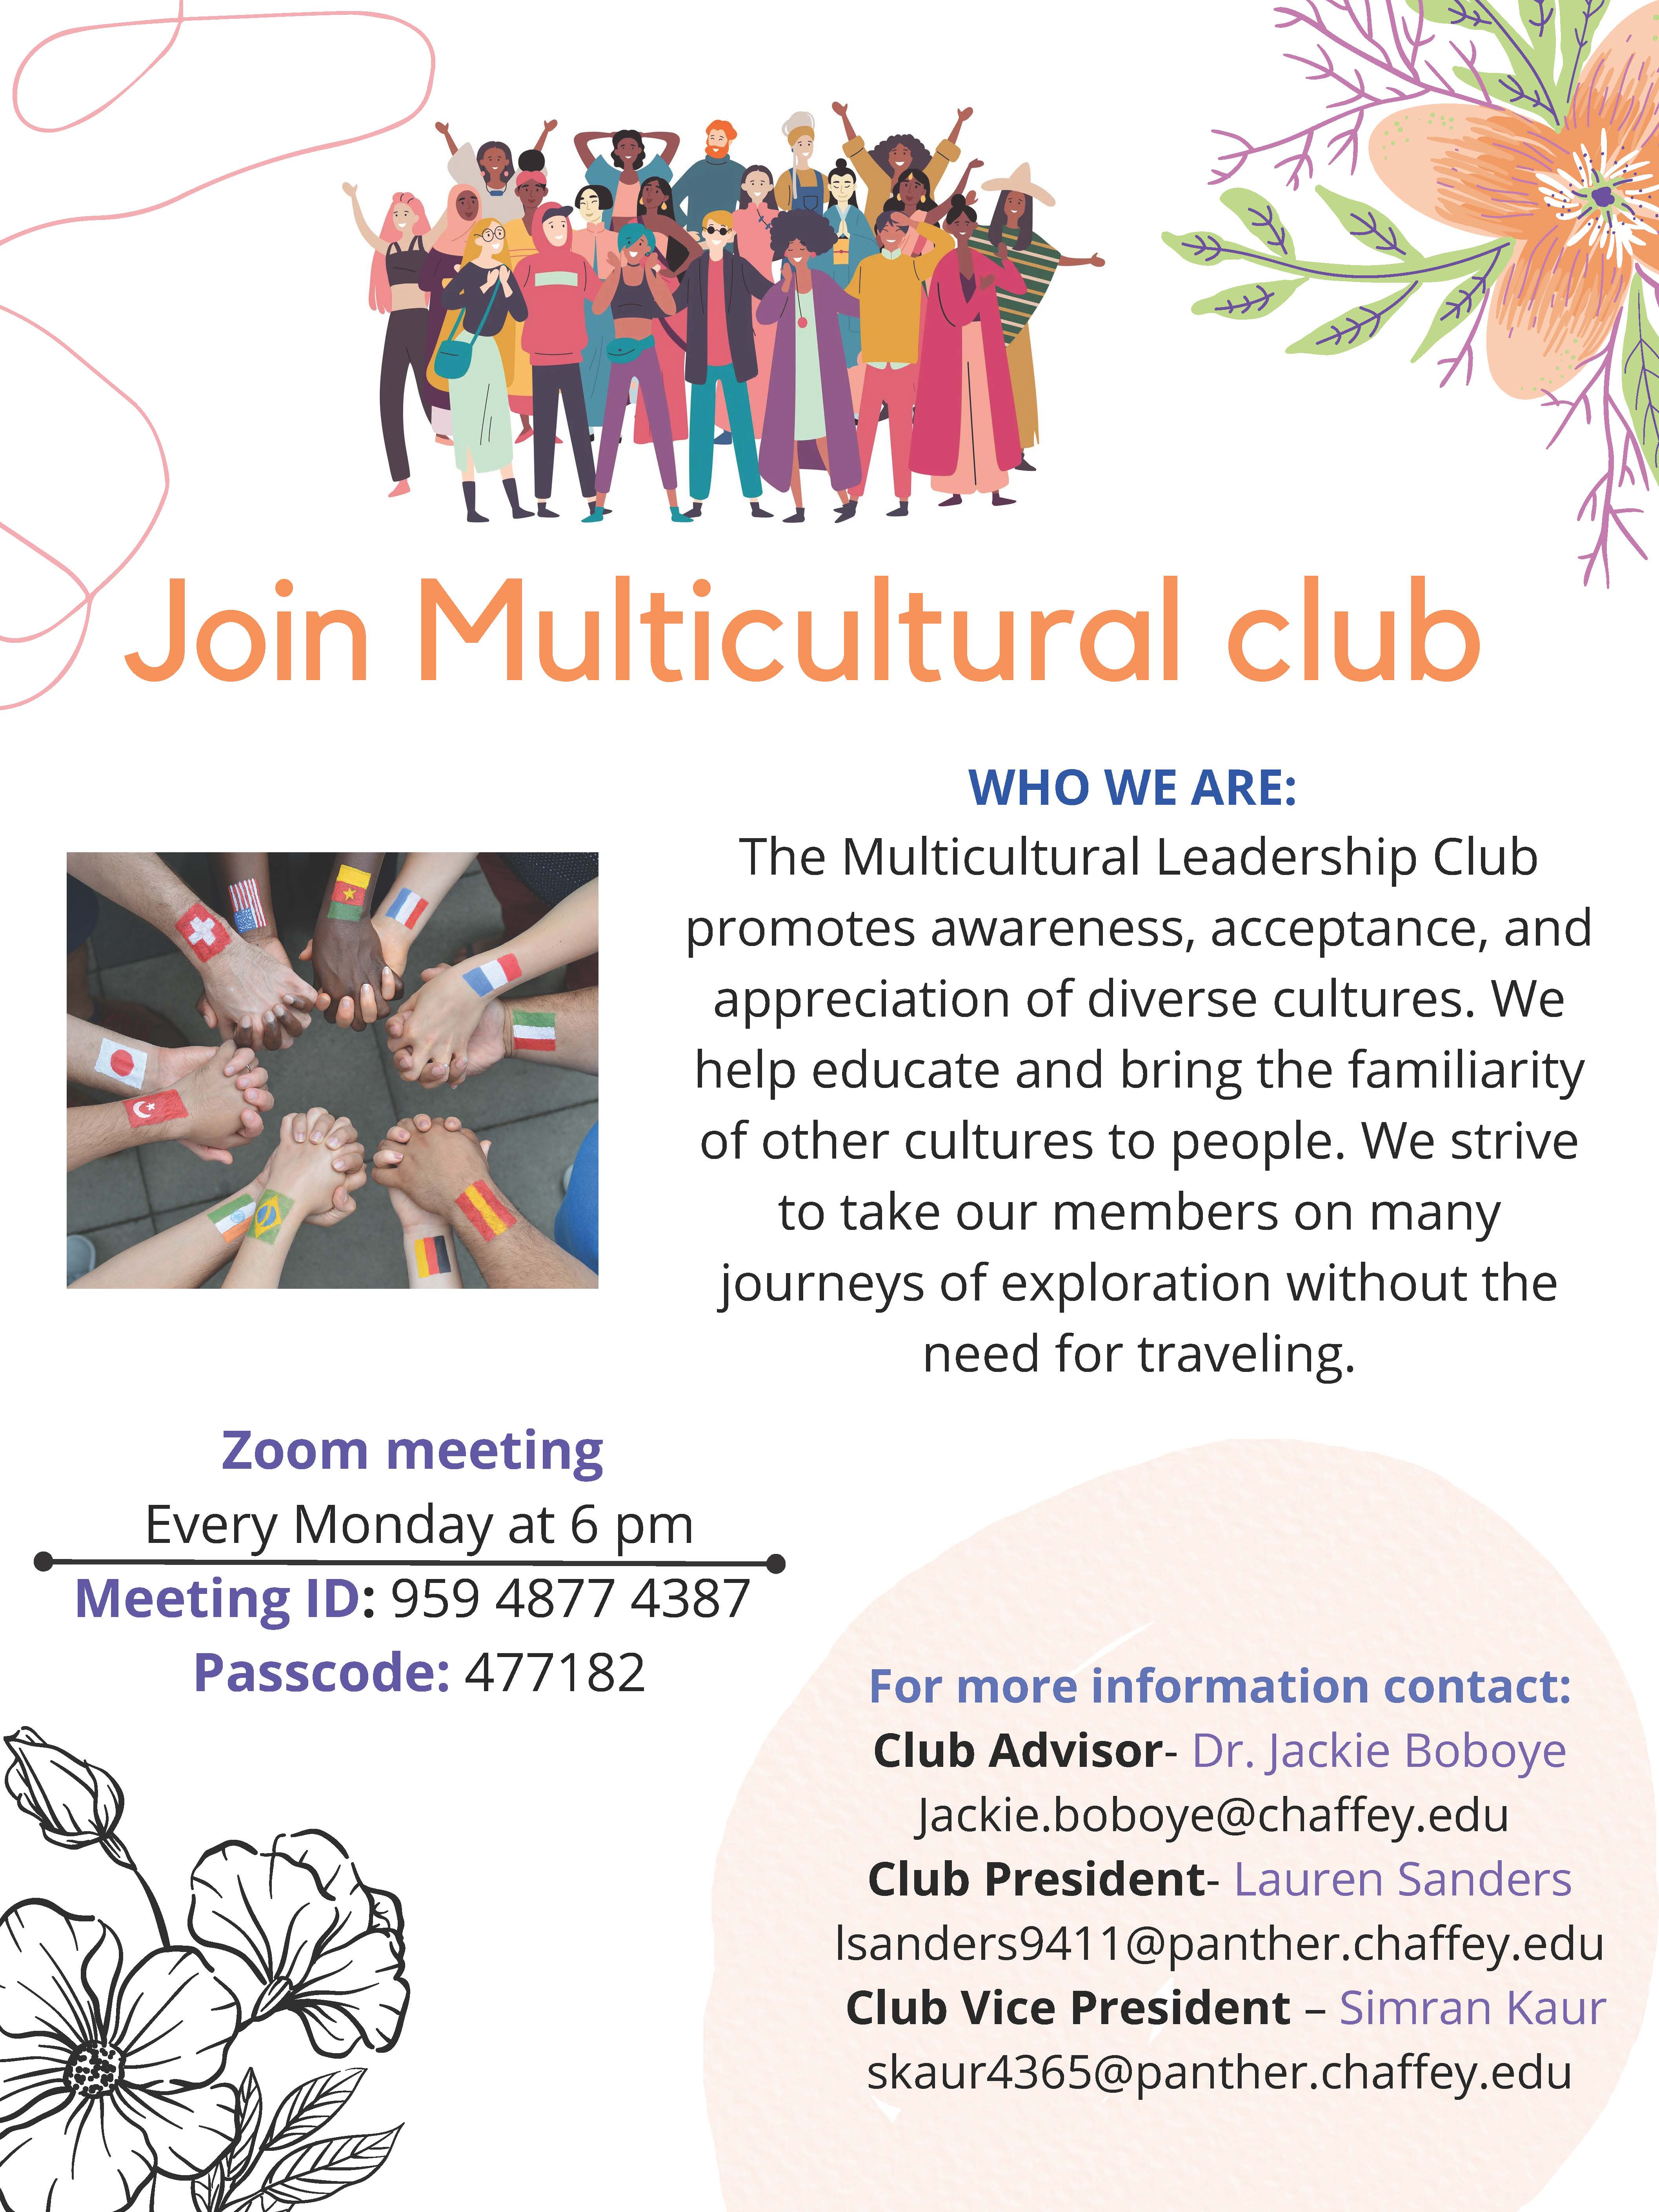 Multicultural Club Flyer